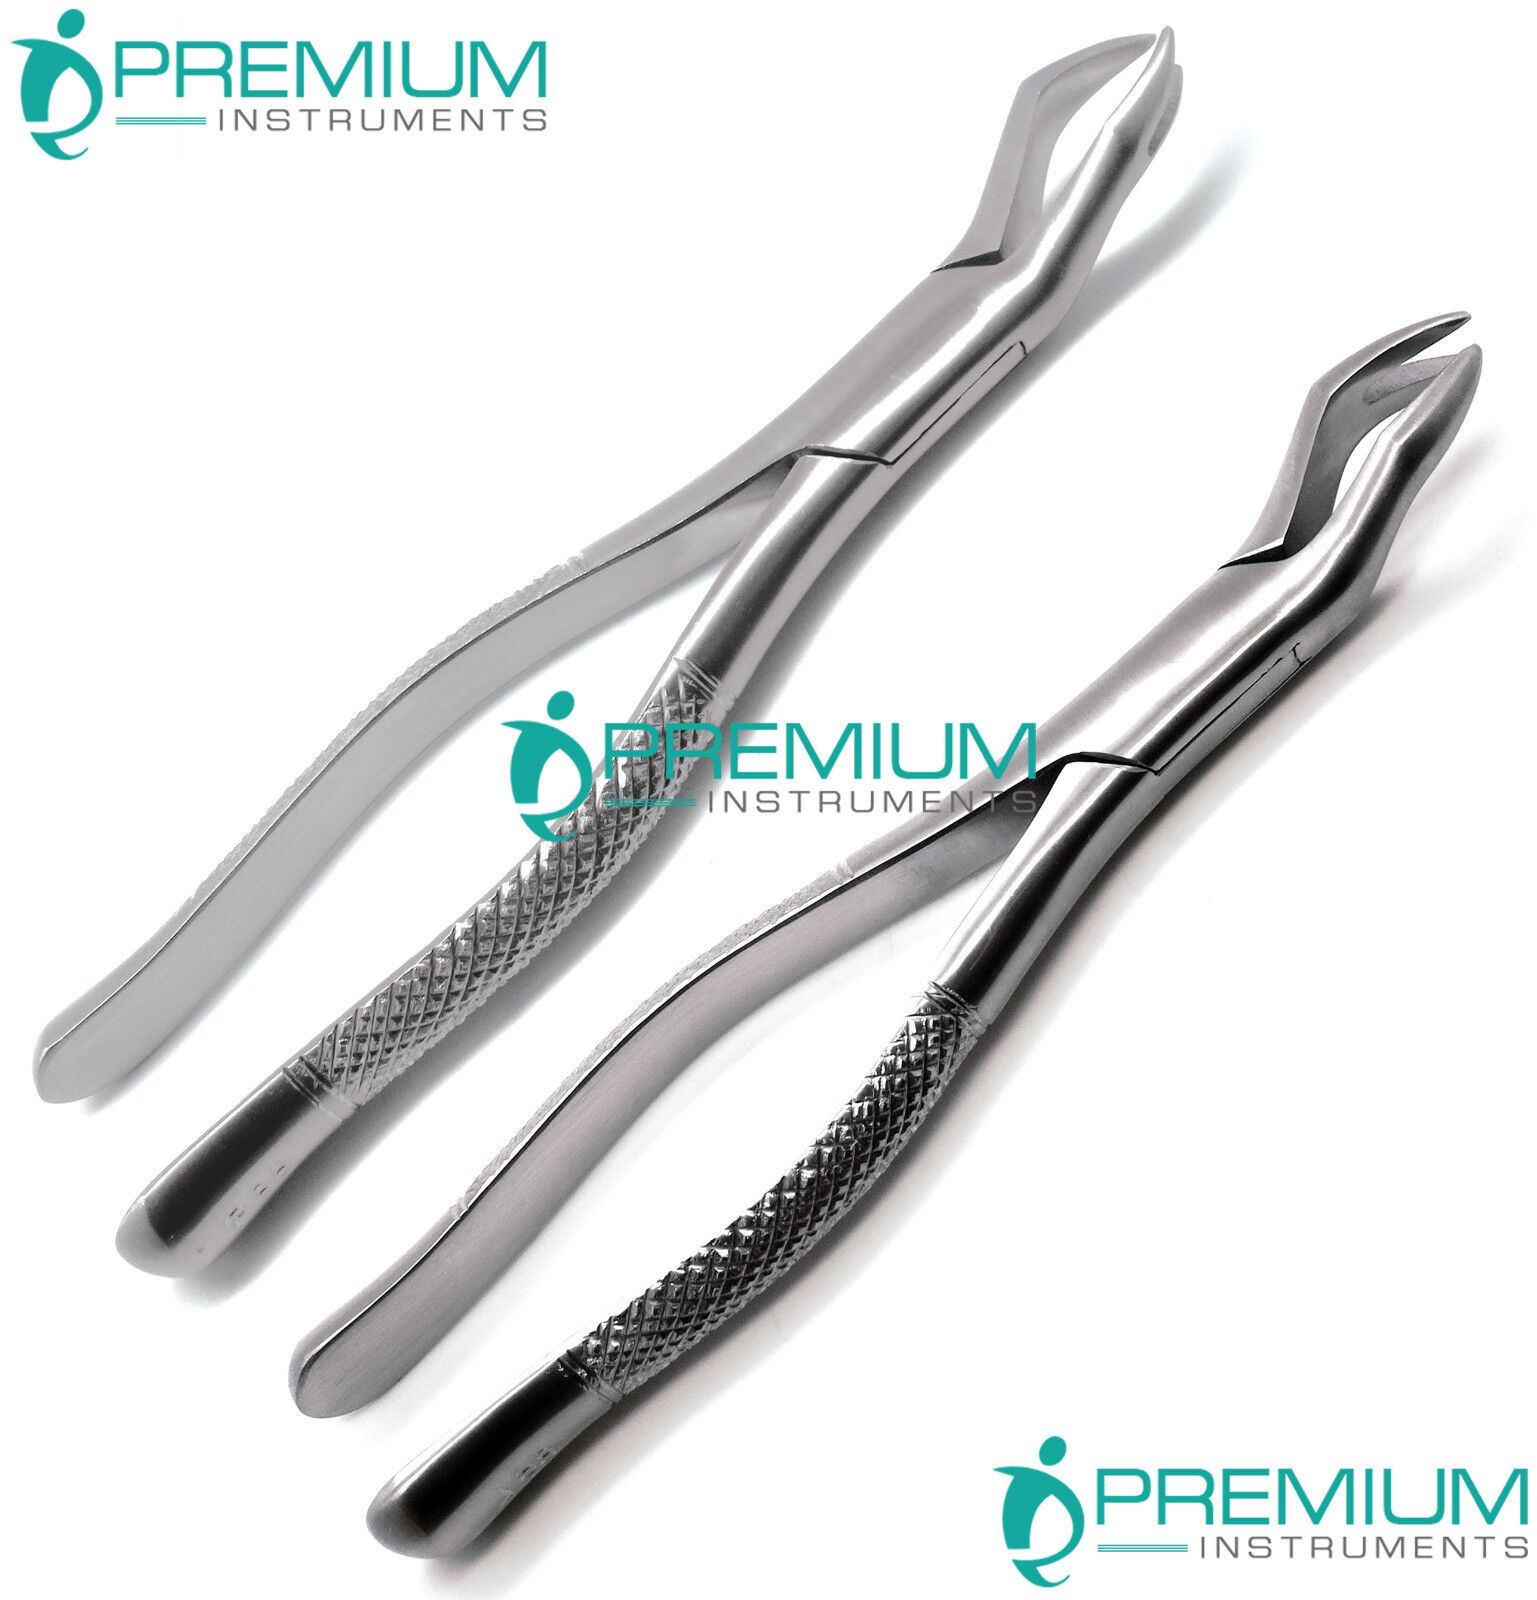 Dental Extracting Forceps 88R & 88L Molar Tooth Surgical Instruments Set of 2